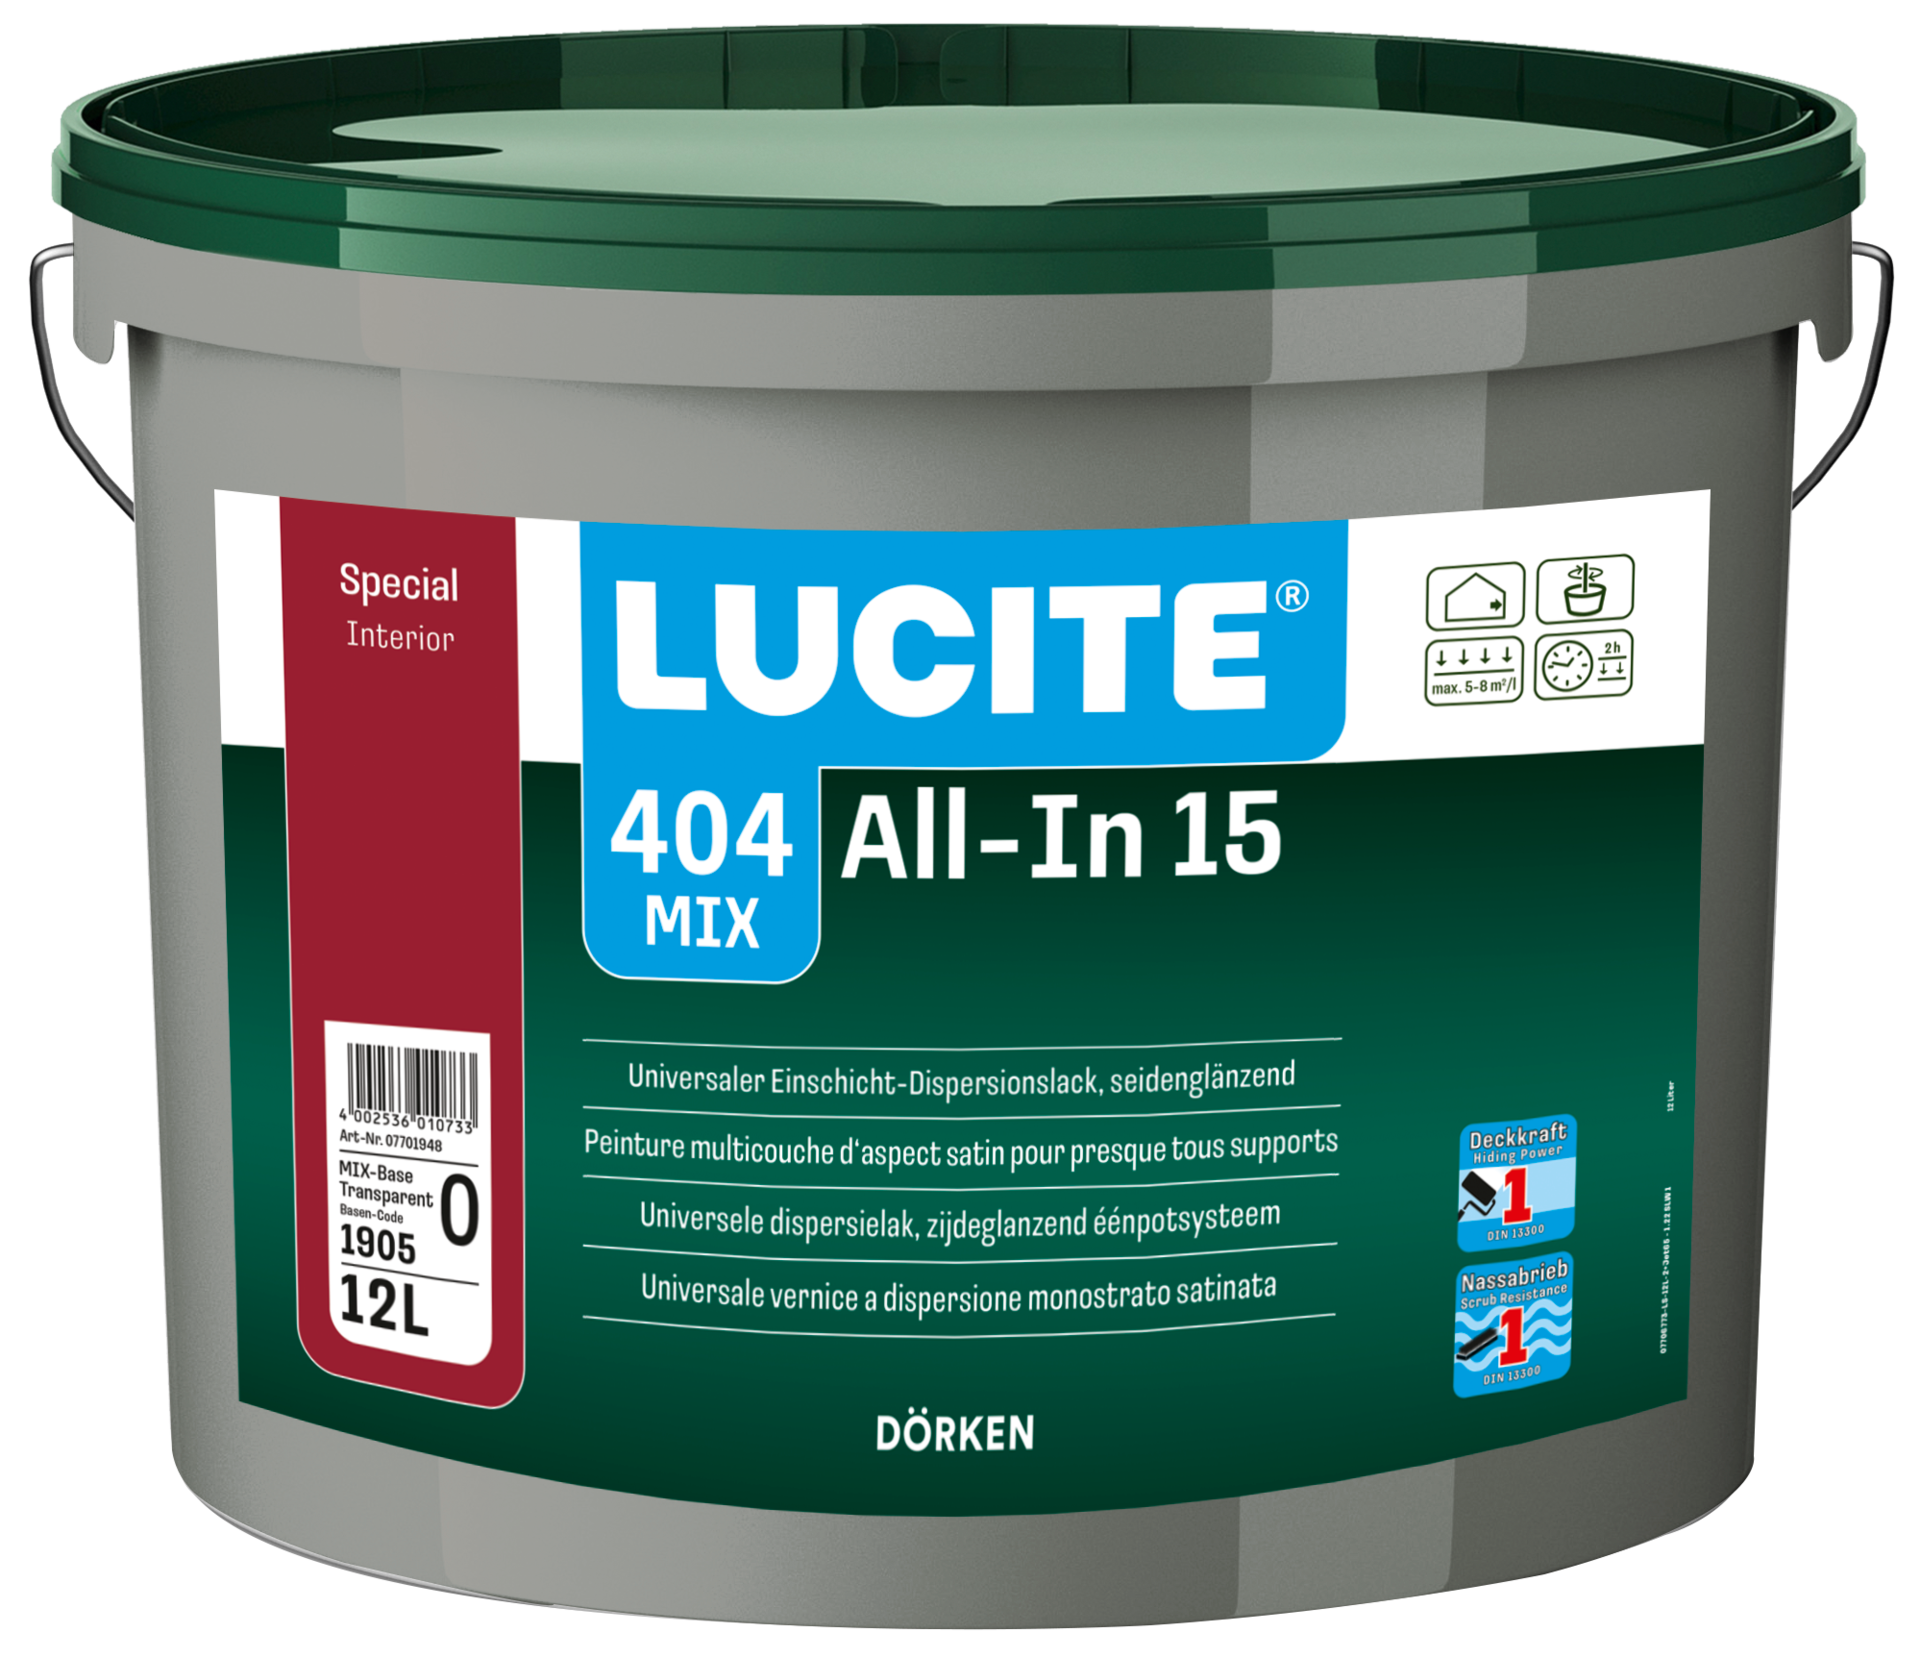 LUCITE® 404 All-in 15